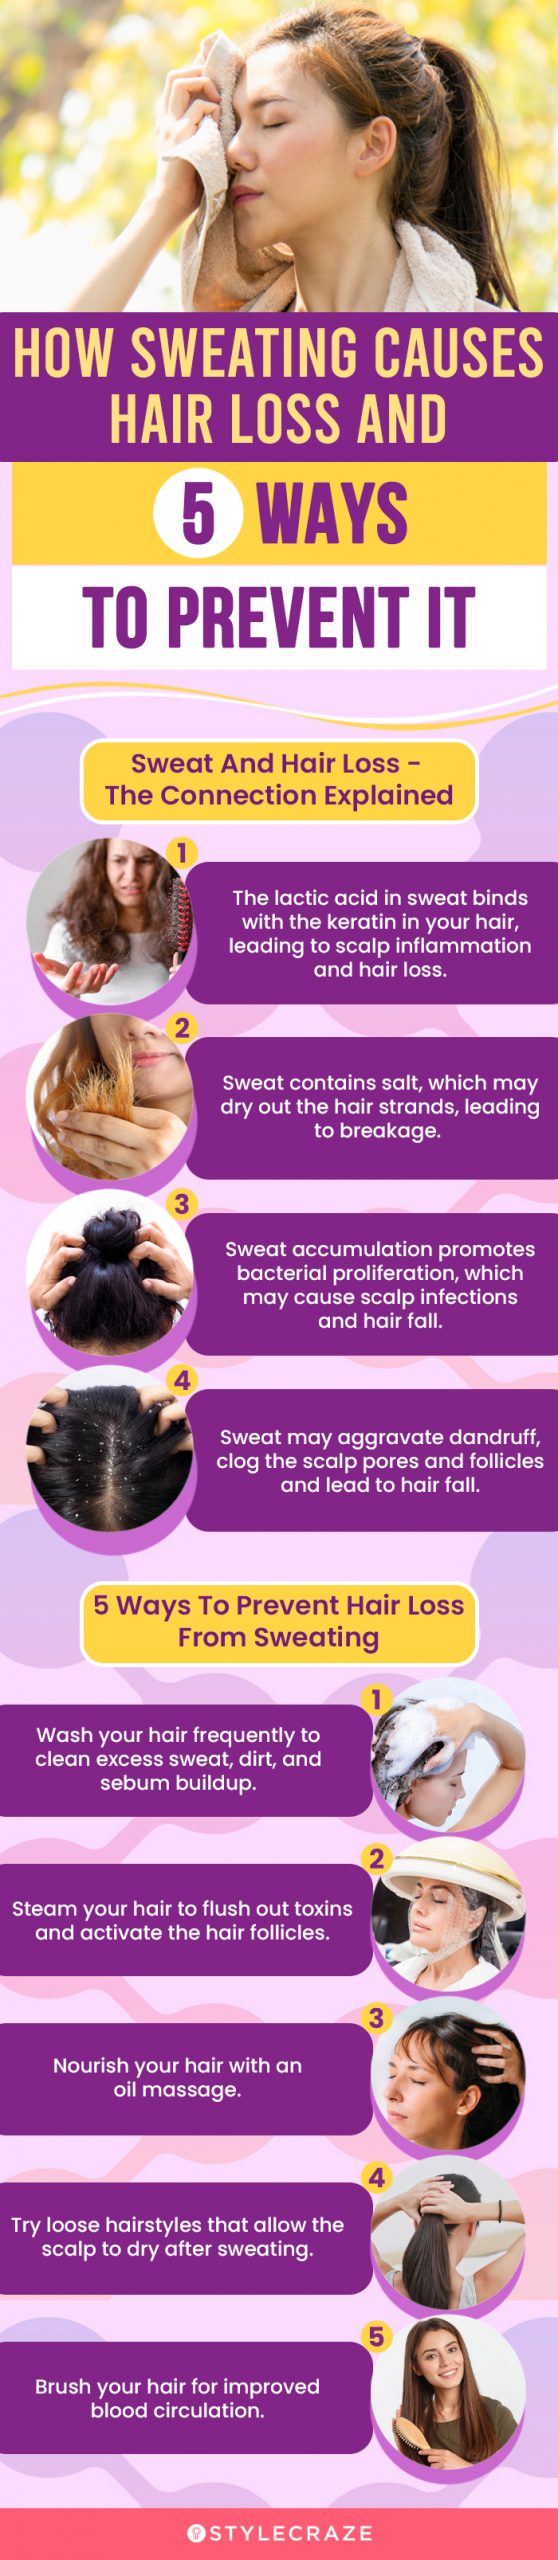 Does Sweating Lead To Hair Loss? Tips And Tricks To Prevent It